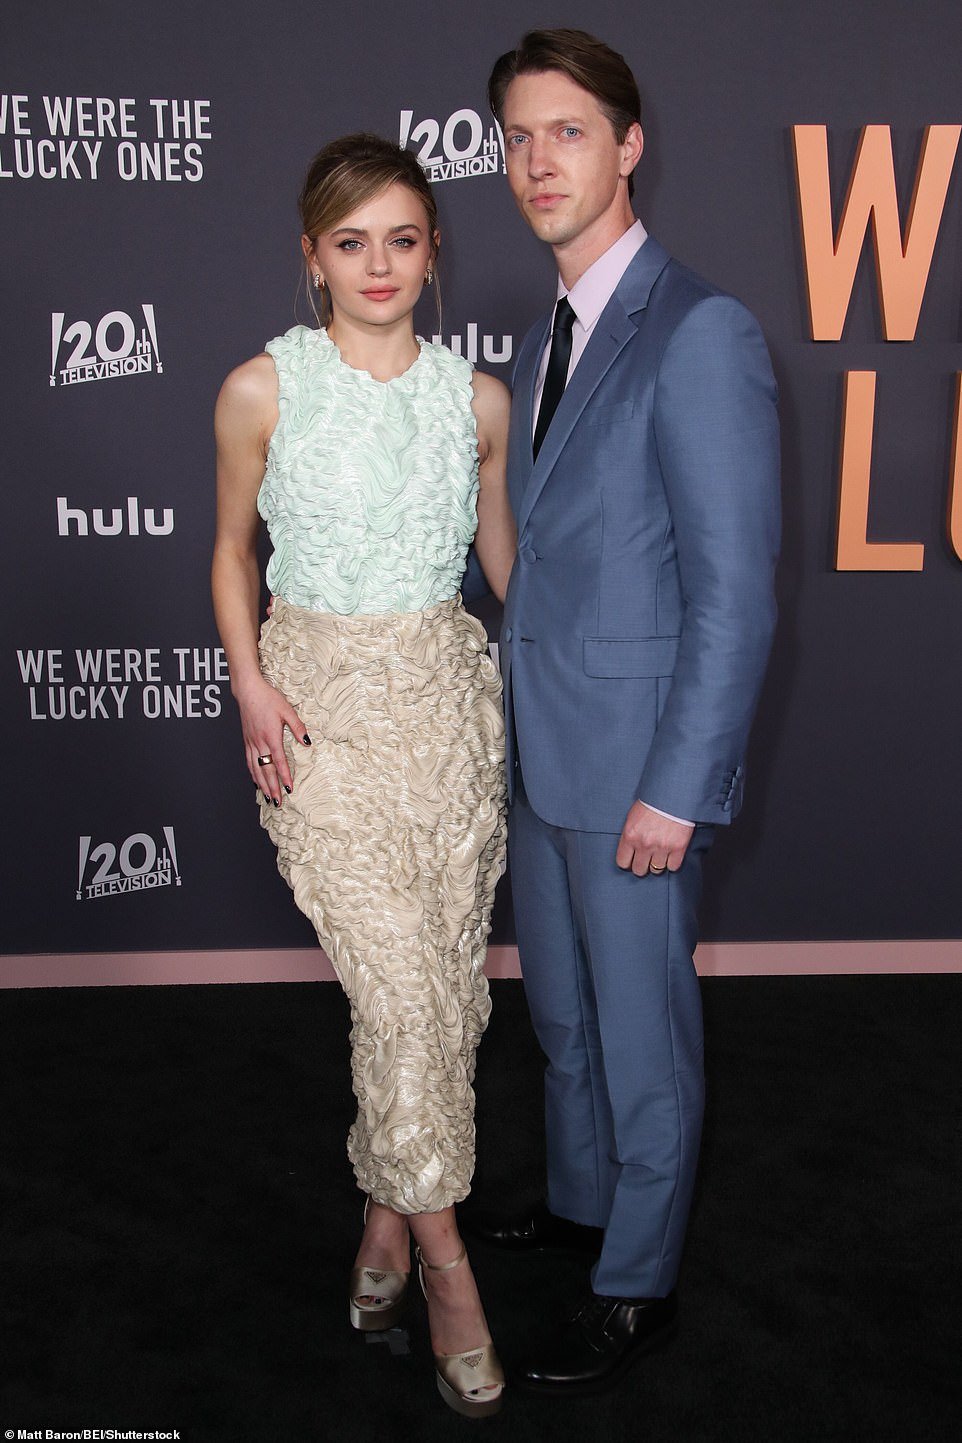 Joey King and Steven Piet walked their first red carpet as newlyweds at the Los Angeles premiere of her Hulu series We Were The Lucky Ones, held Thursday at the Academy Museum of Motion Pictures